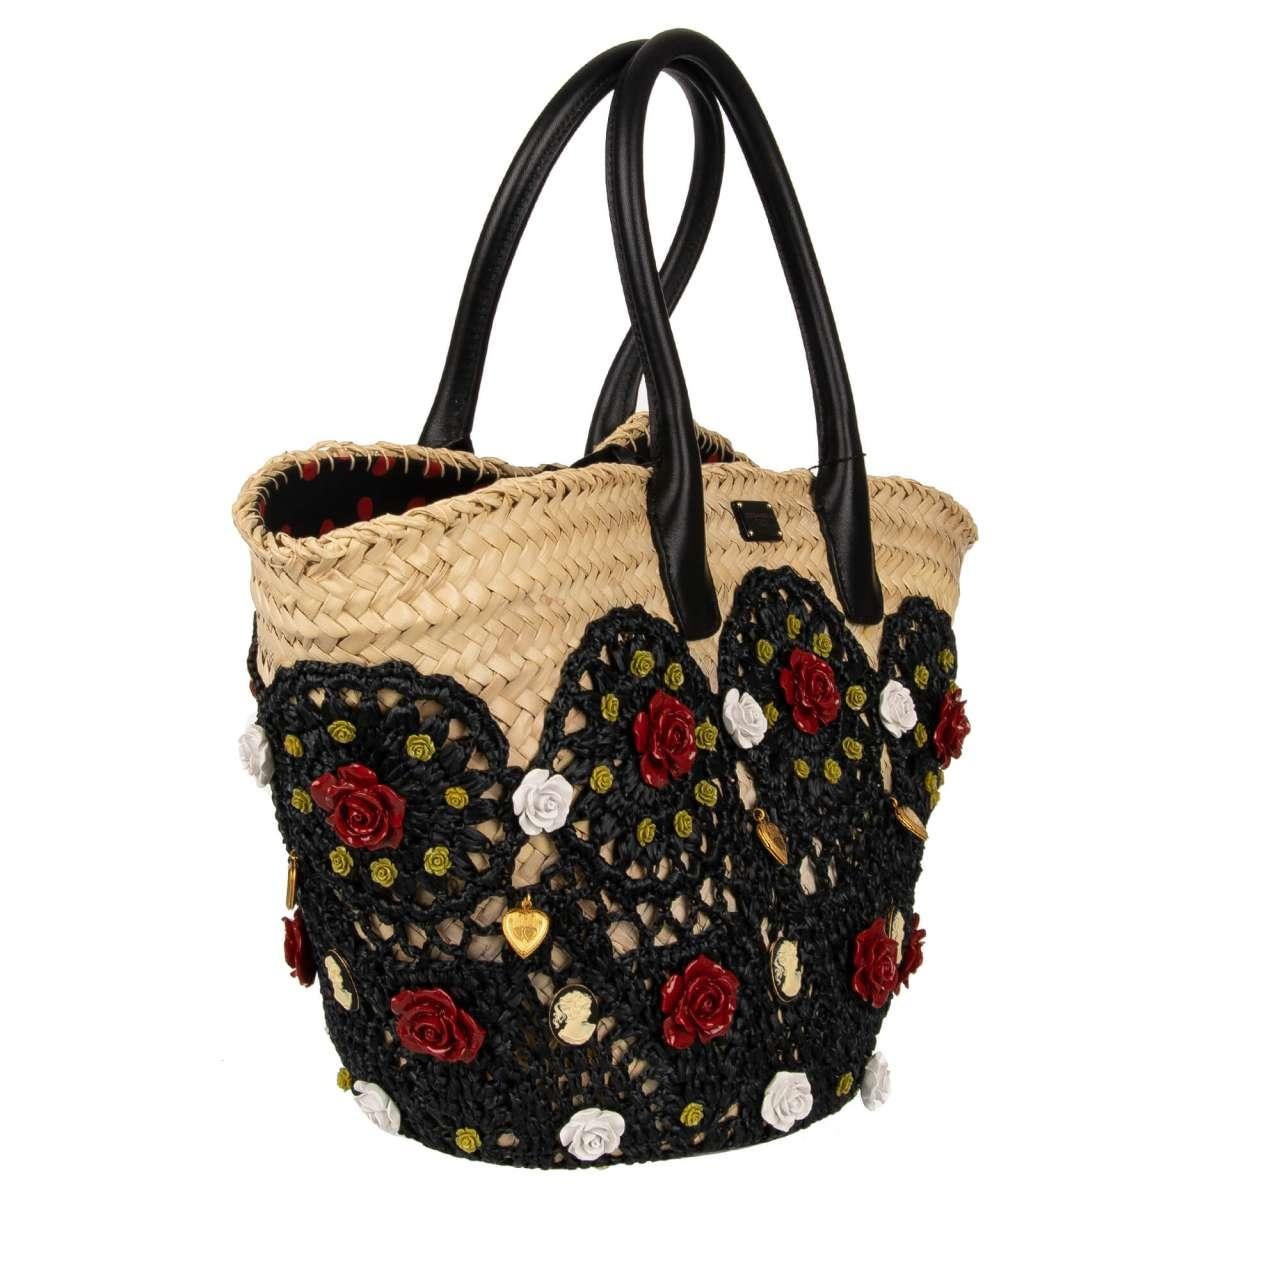 D&G Large Jeweled Straw Basket Beach Bag KENDRA with Roses Black Beige In Excellent Condition For Sale In Erkrath, DE